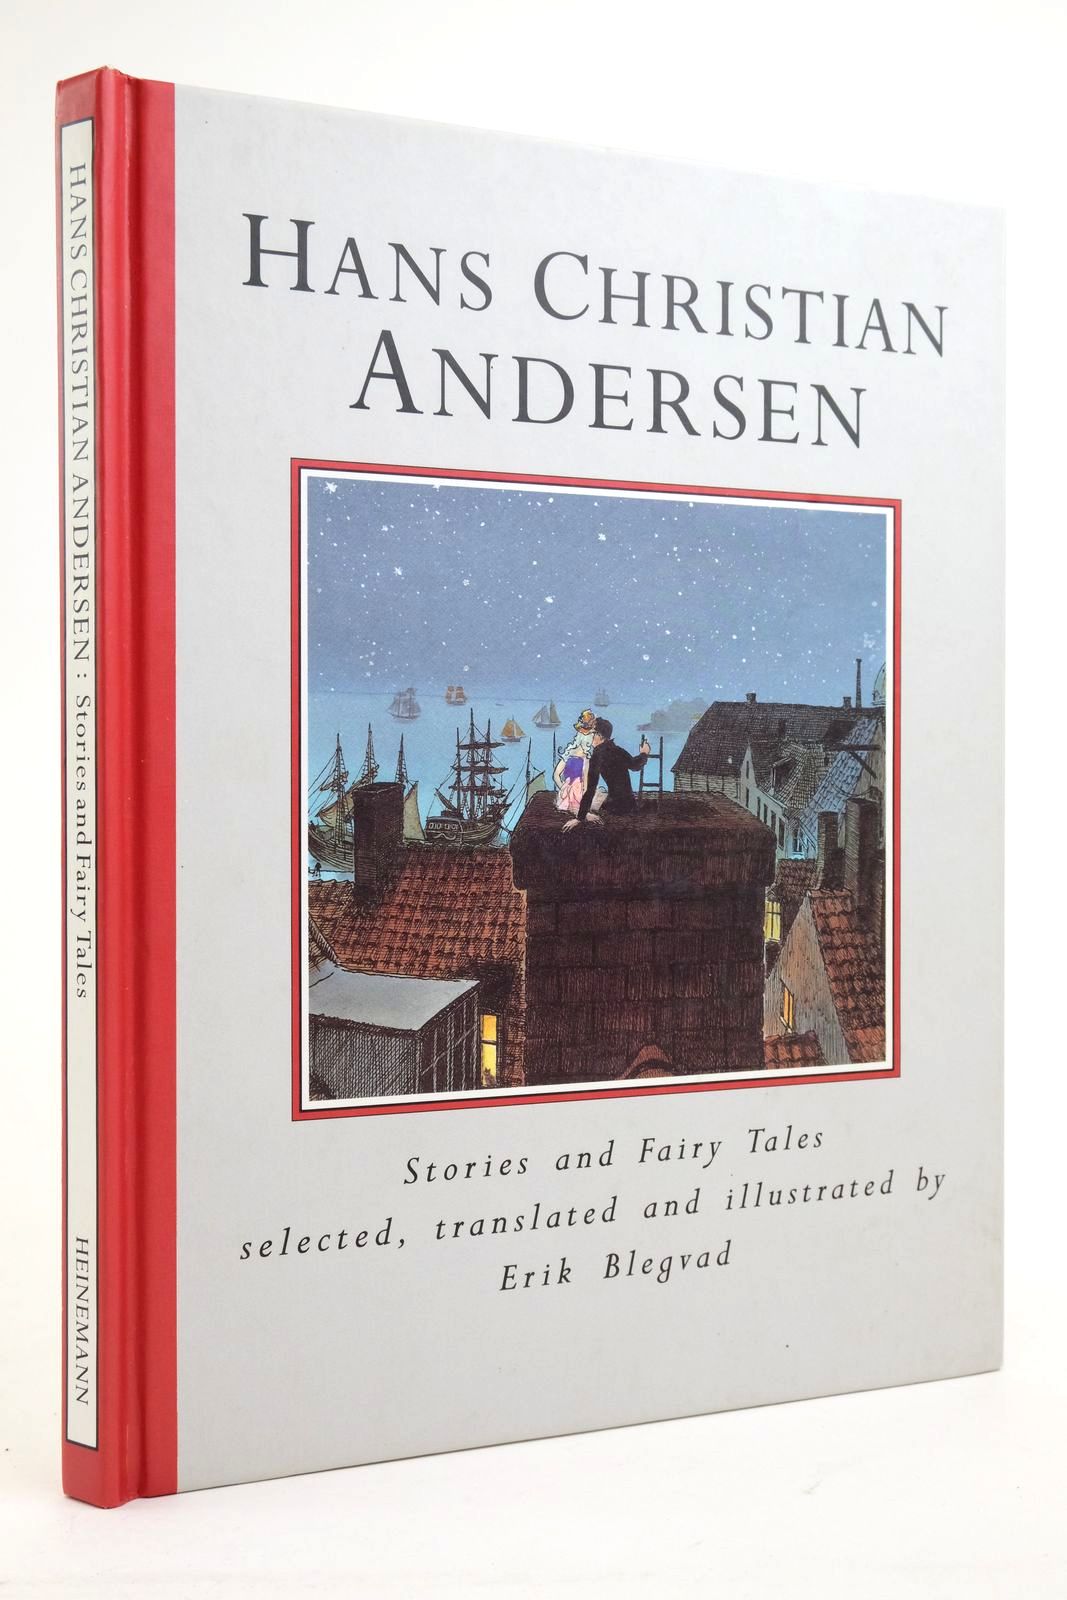 Photo of HANS CHRISTIAN ANDERSEN STORIES AND FAIRY TALES written by Andersen, Hans Christian illustrated by Blegvad, Erik published by Heinemann (STOCK CODE: 2135972)  for sale by Stella & Rose's Books